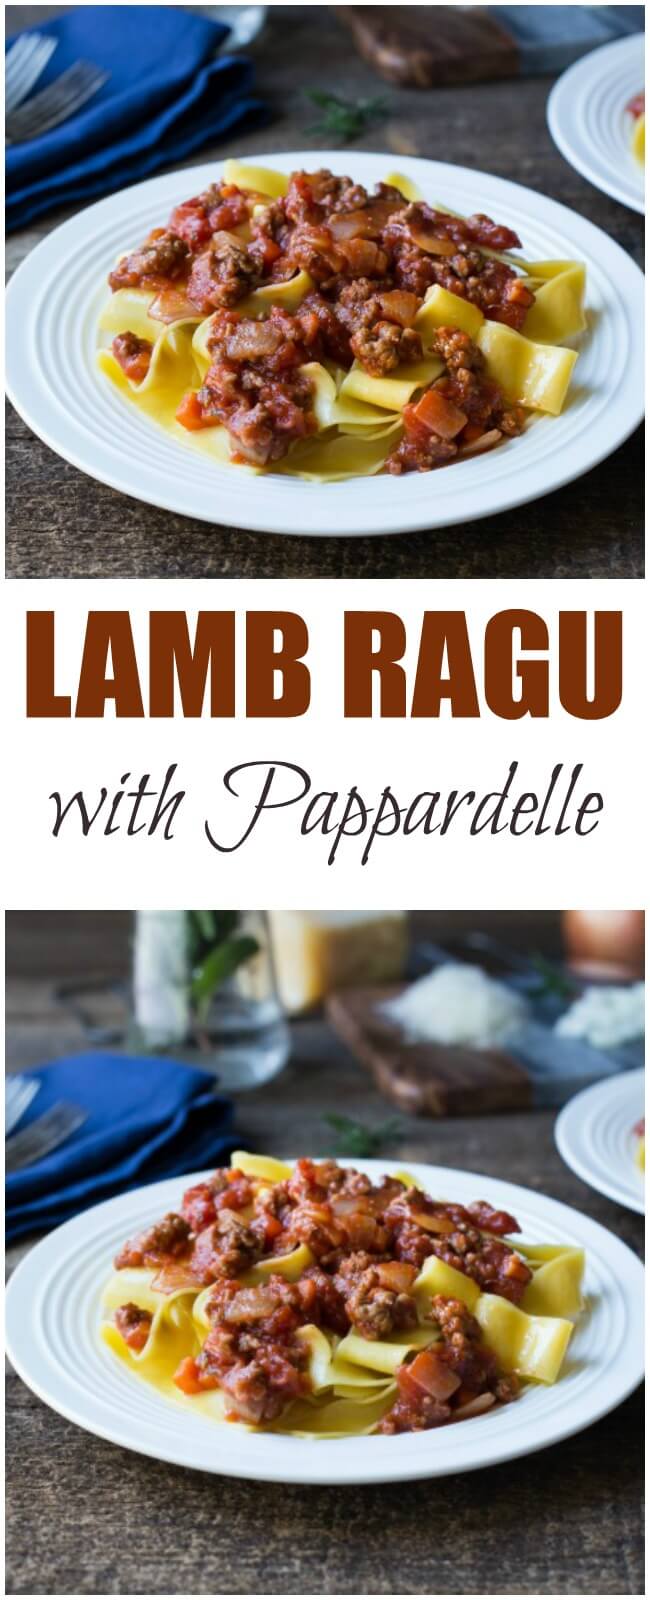 Looking for a fabulous comfort food or savory meal this delicious and easy Lamb Ragu with Pappardelle recipe will check all the boxes.  